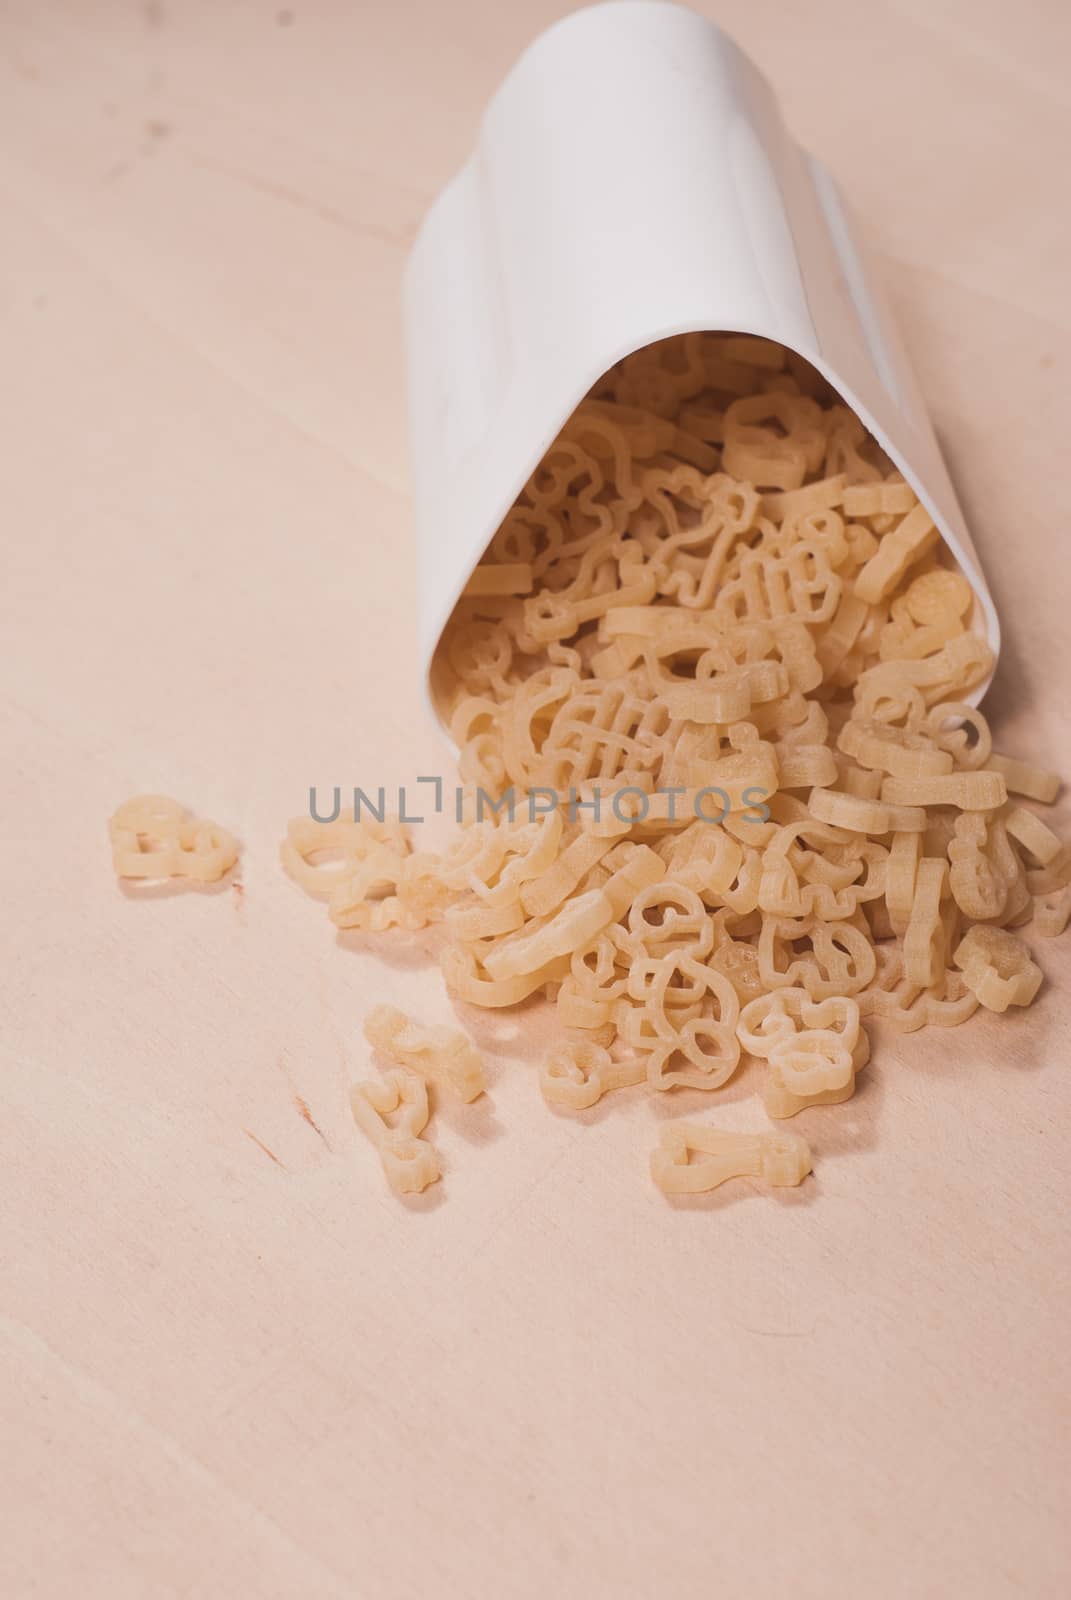 The pasta scattered across the wooden surface, white container, healthy food concept